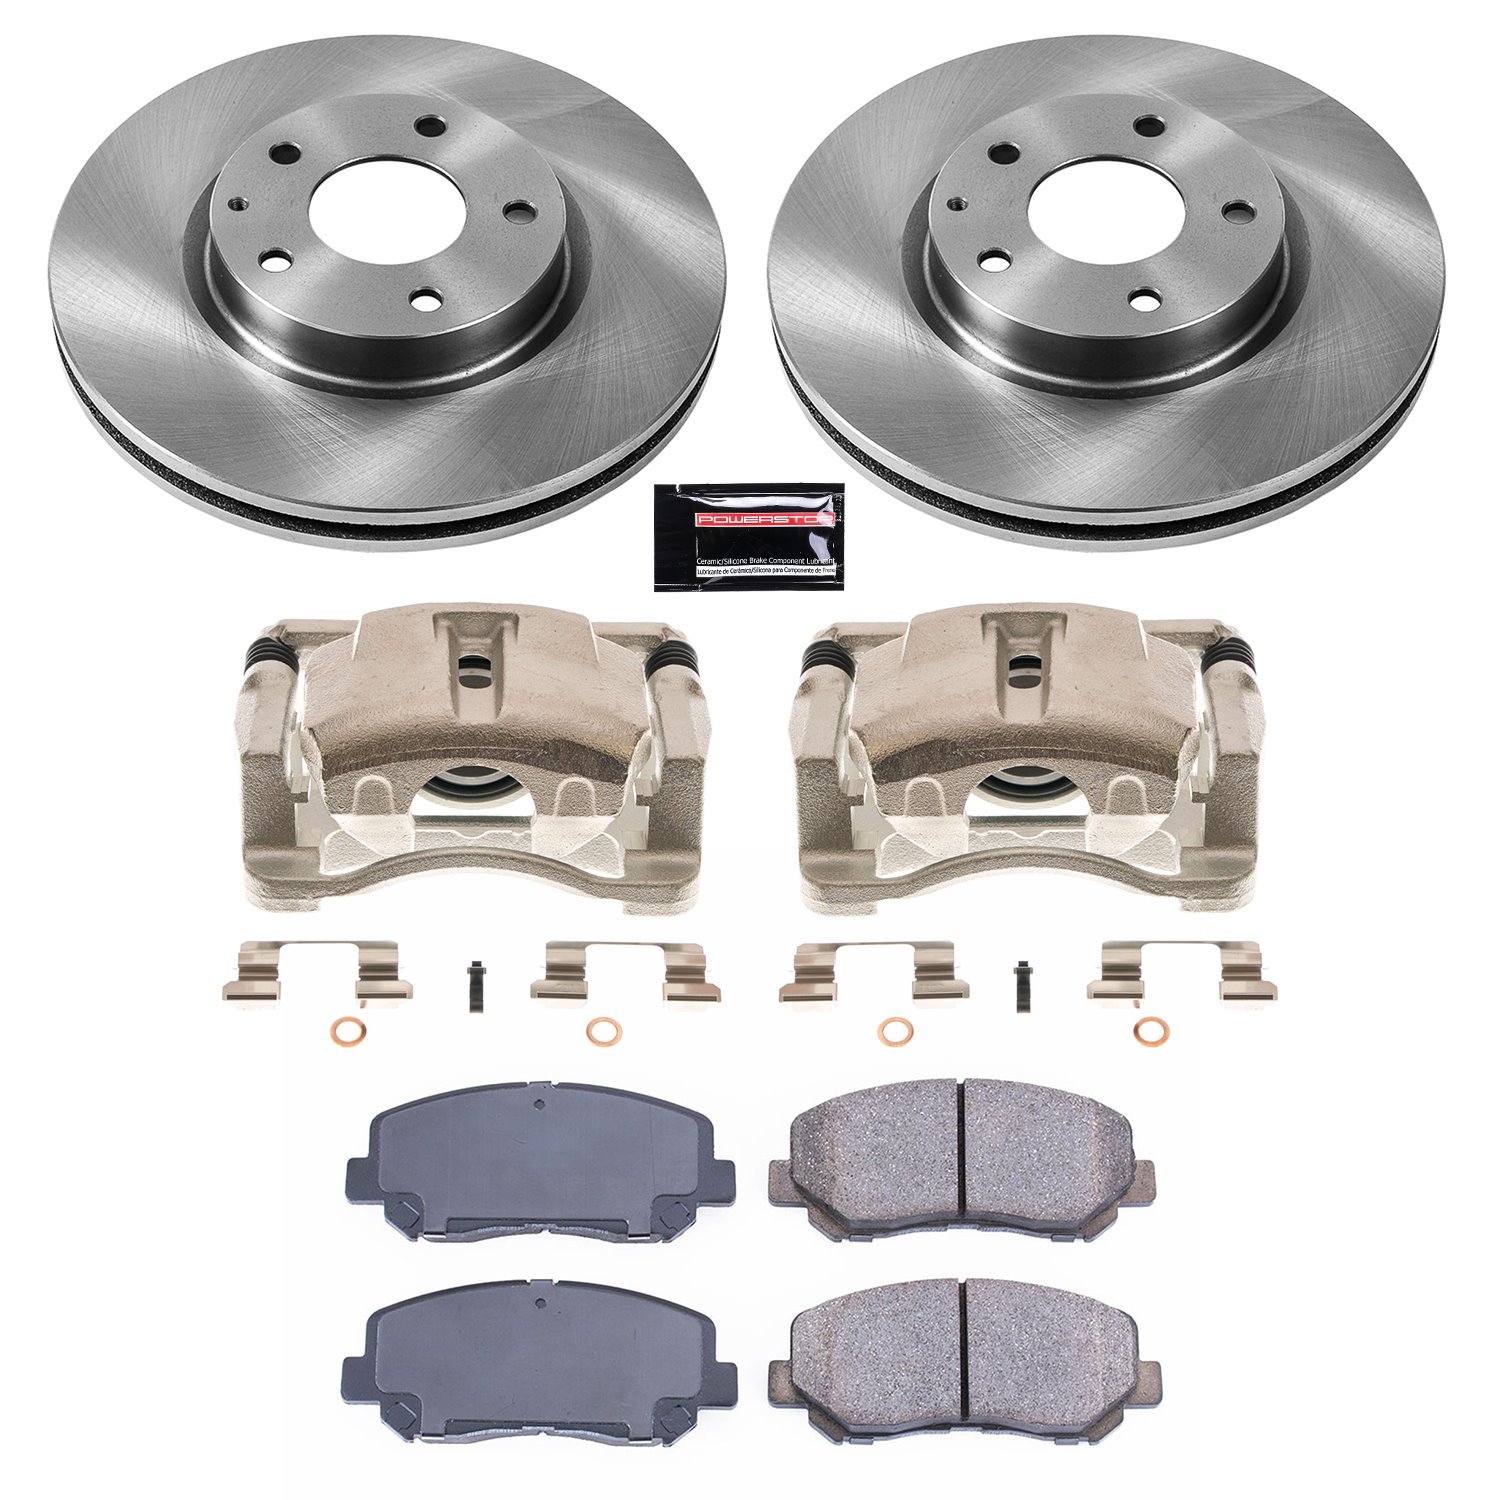 KCOE6967 Autospecialty OE Replacement Brake Kit Fits 2013-2015 Mazda CX-5 Model